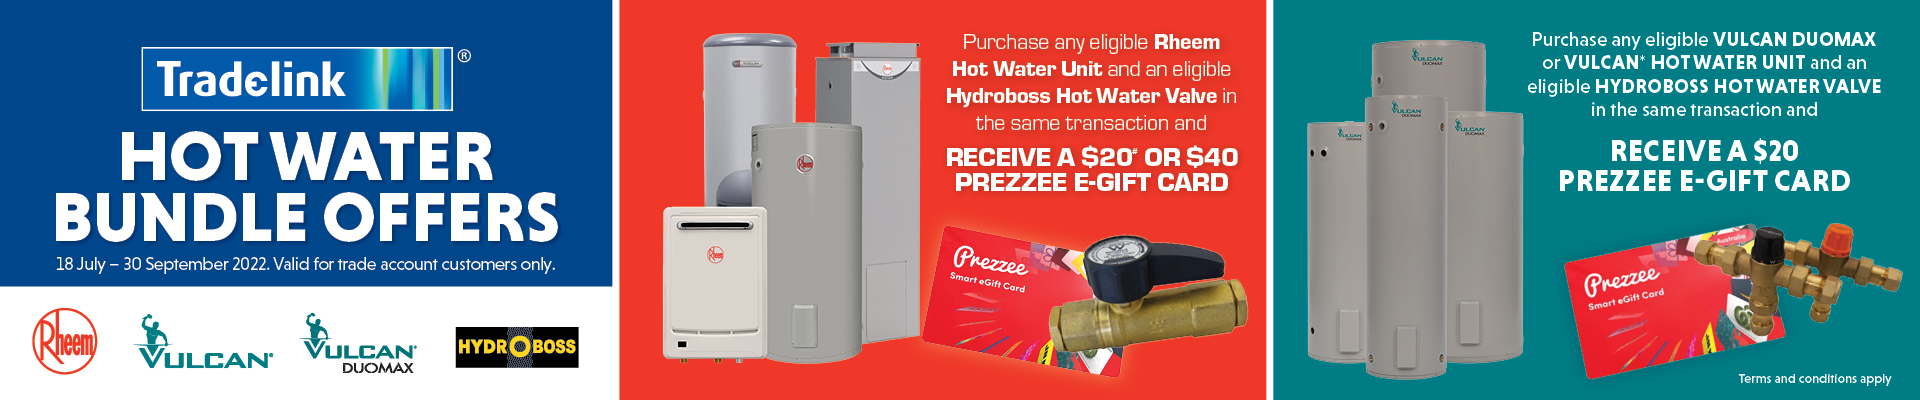 Hot Water Bundle Offers